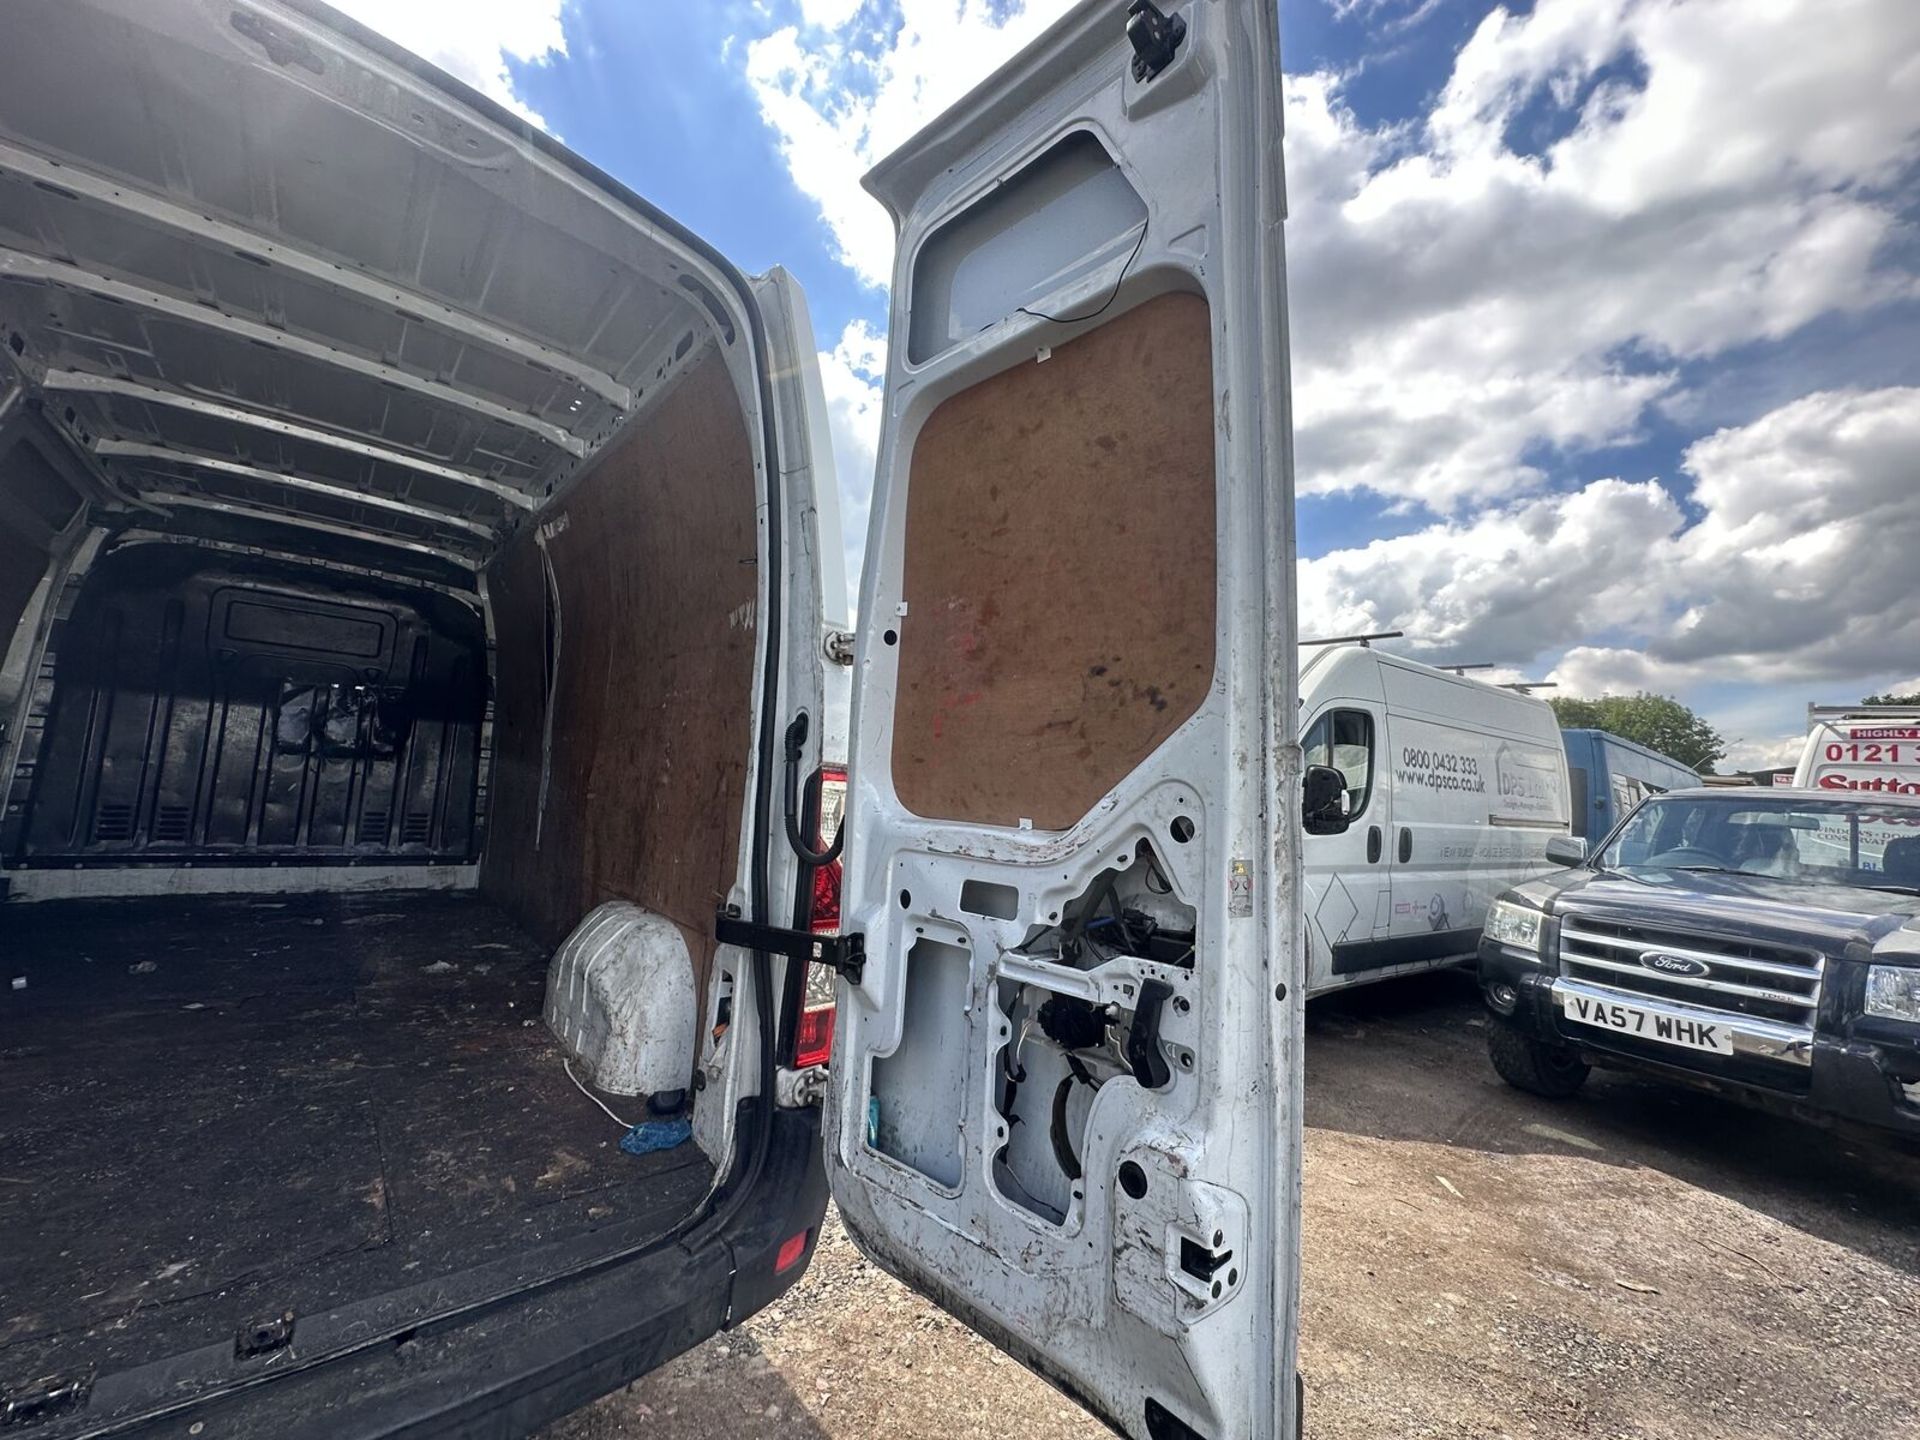 PRICED TO CLEAR - 2016 RENAULT MASTER LWB - (NO VAT ON HAMMER) - Image 9 of 14